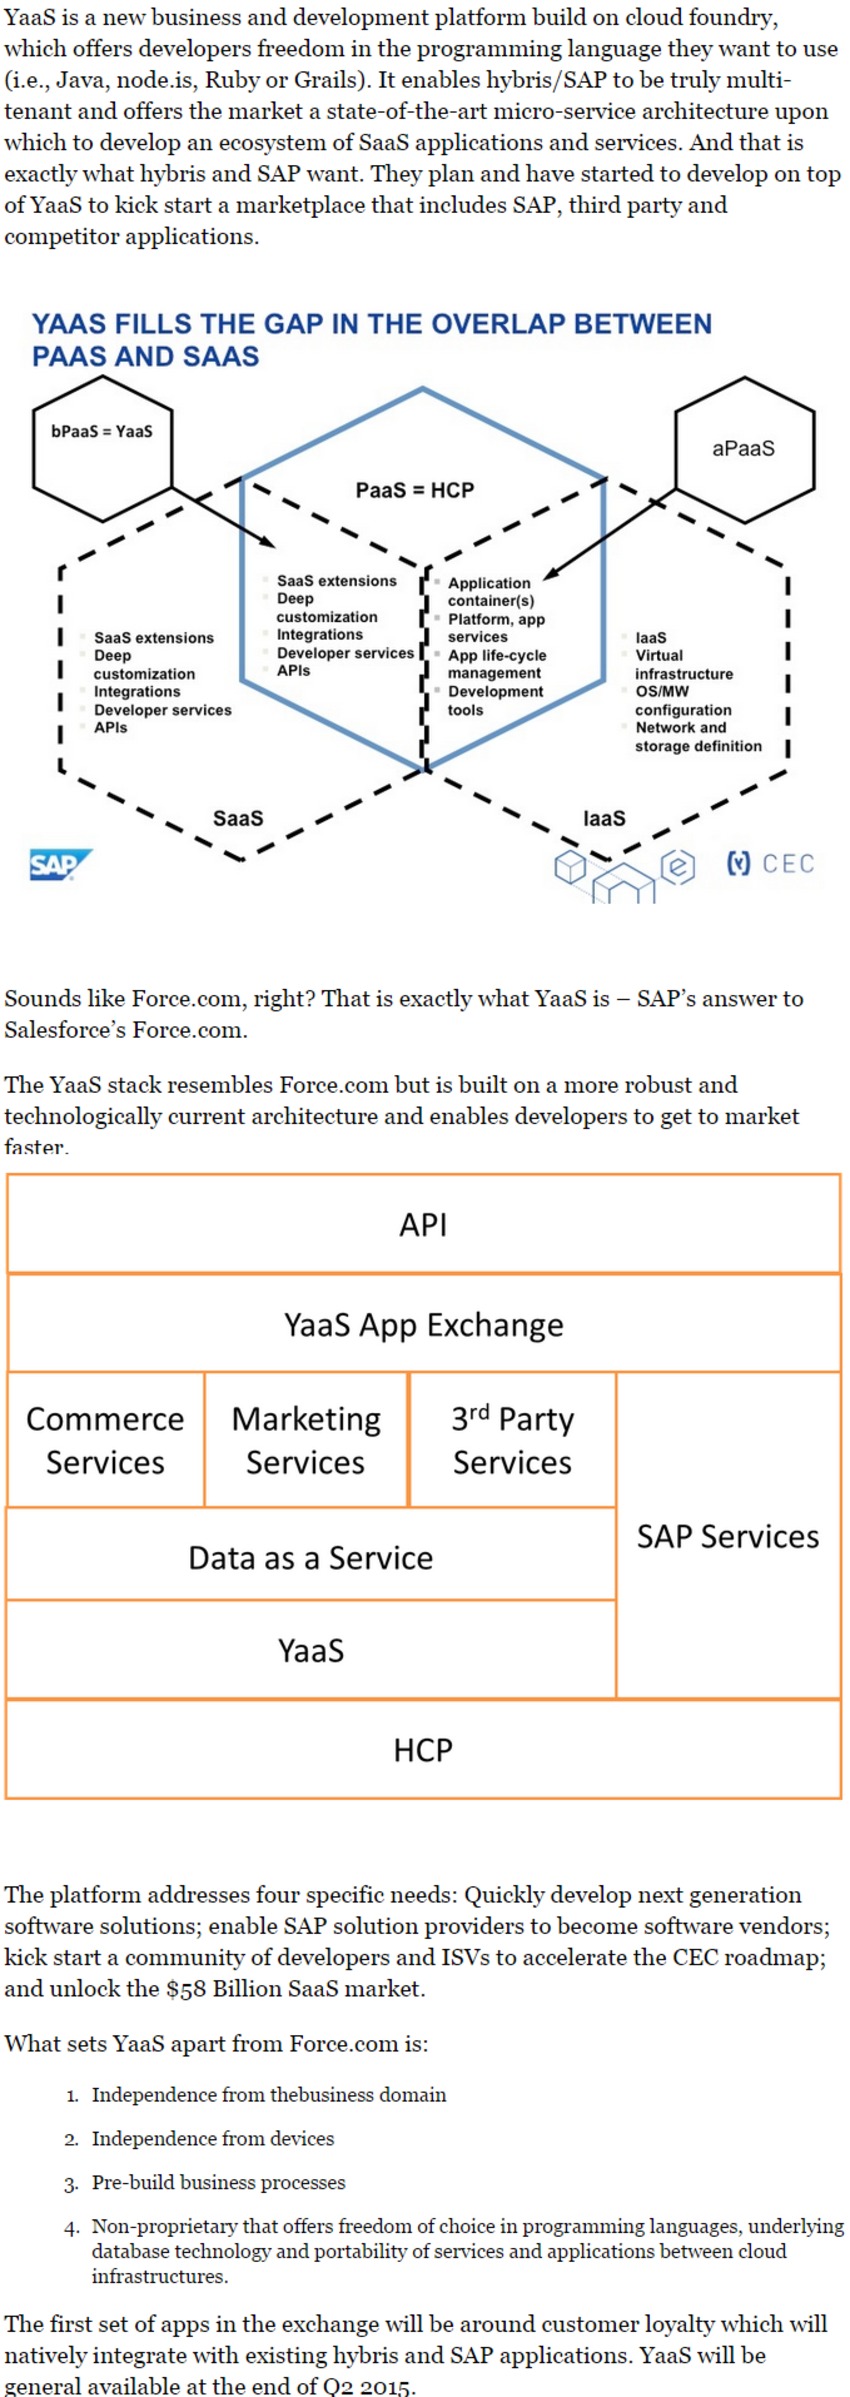 Move Over Salesforce, SAP Hybris YaaS Is Staking Claim - Forbes | The MarTech Digest | Scoop.it